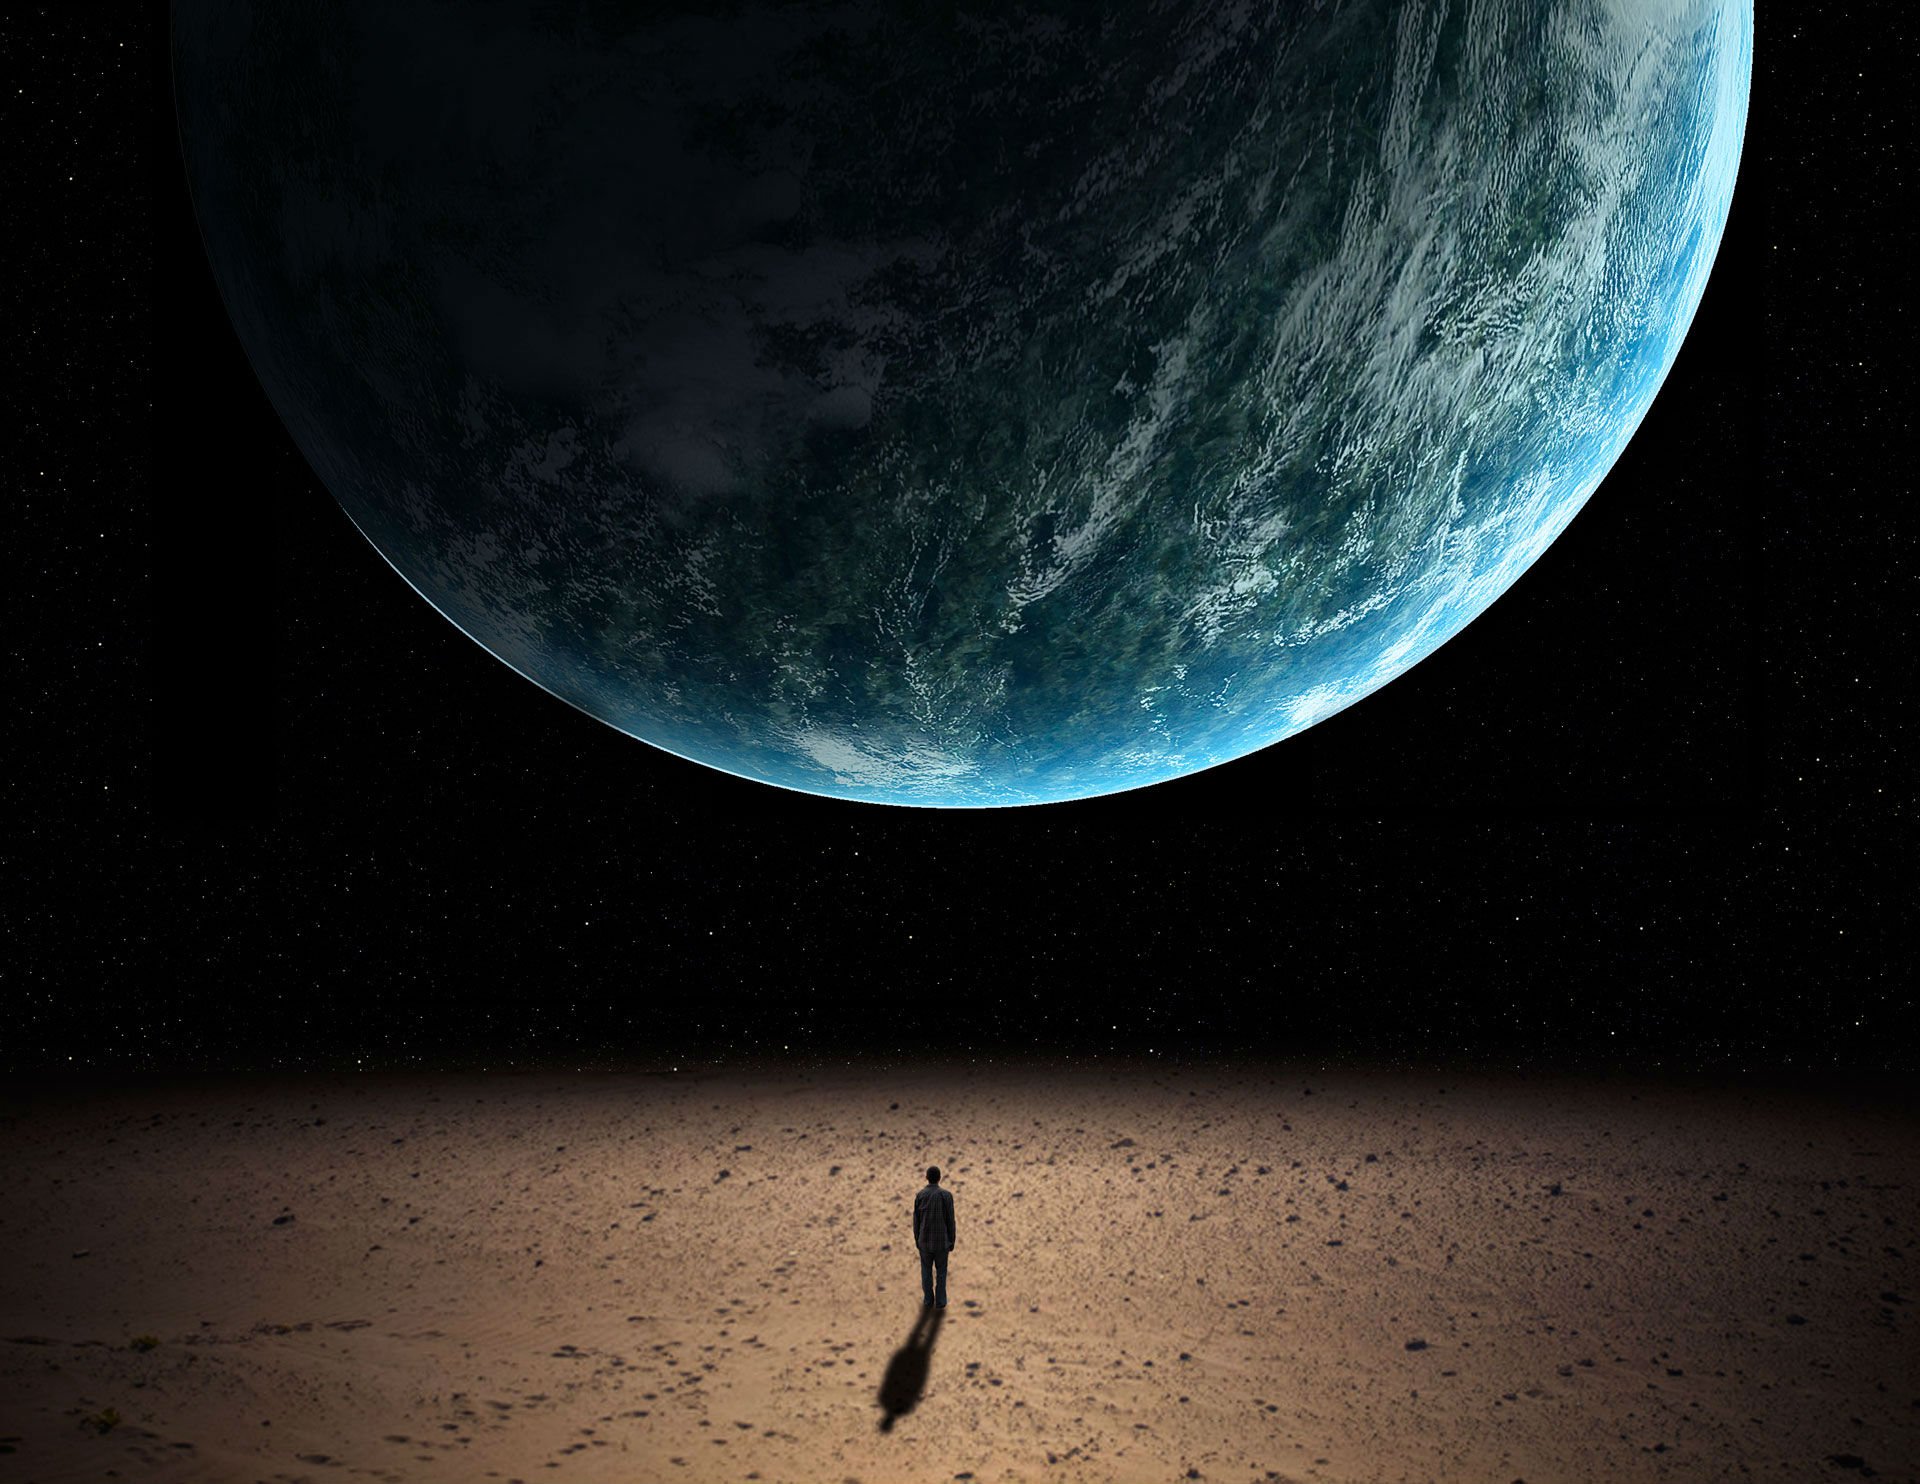 lonely, Mood, Sad, Alone, Sadness, Emotion, People, Loneliness, Solitude, Earth, Planet Wallpaper